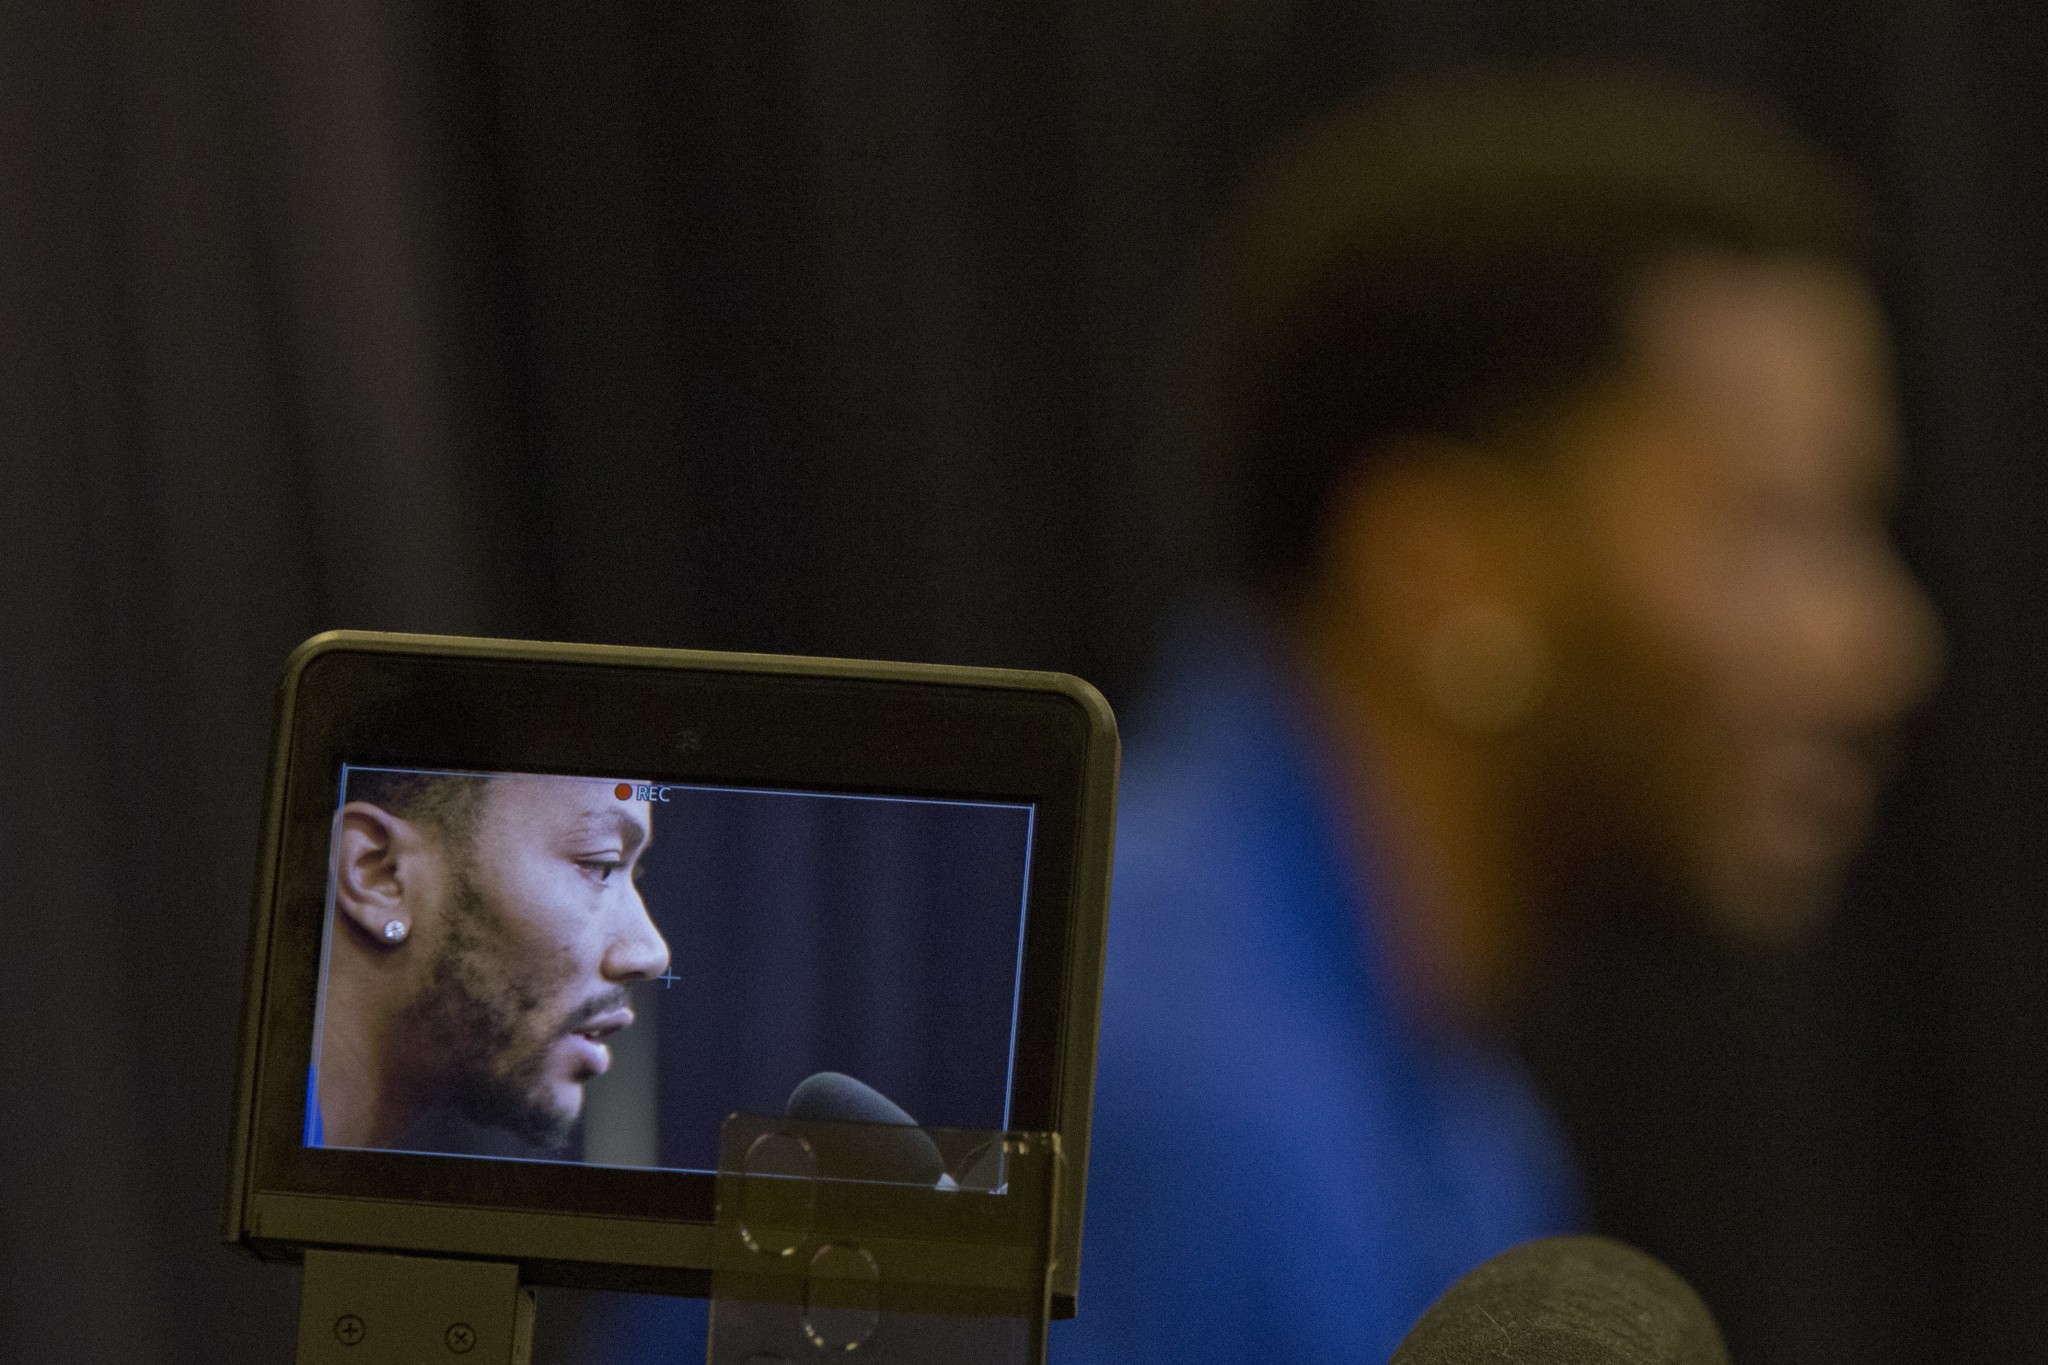 Derrick Rose is displayed on the screen of a video camera as he speaks during a news conference at Madison Square Garden, Friday, June 24, 2016, in New York. (AP/Mary Altaffer)